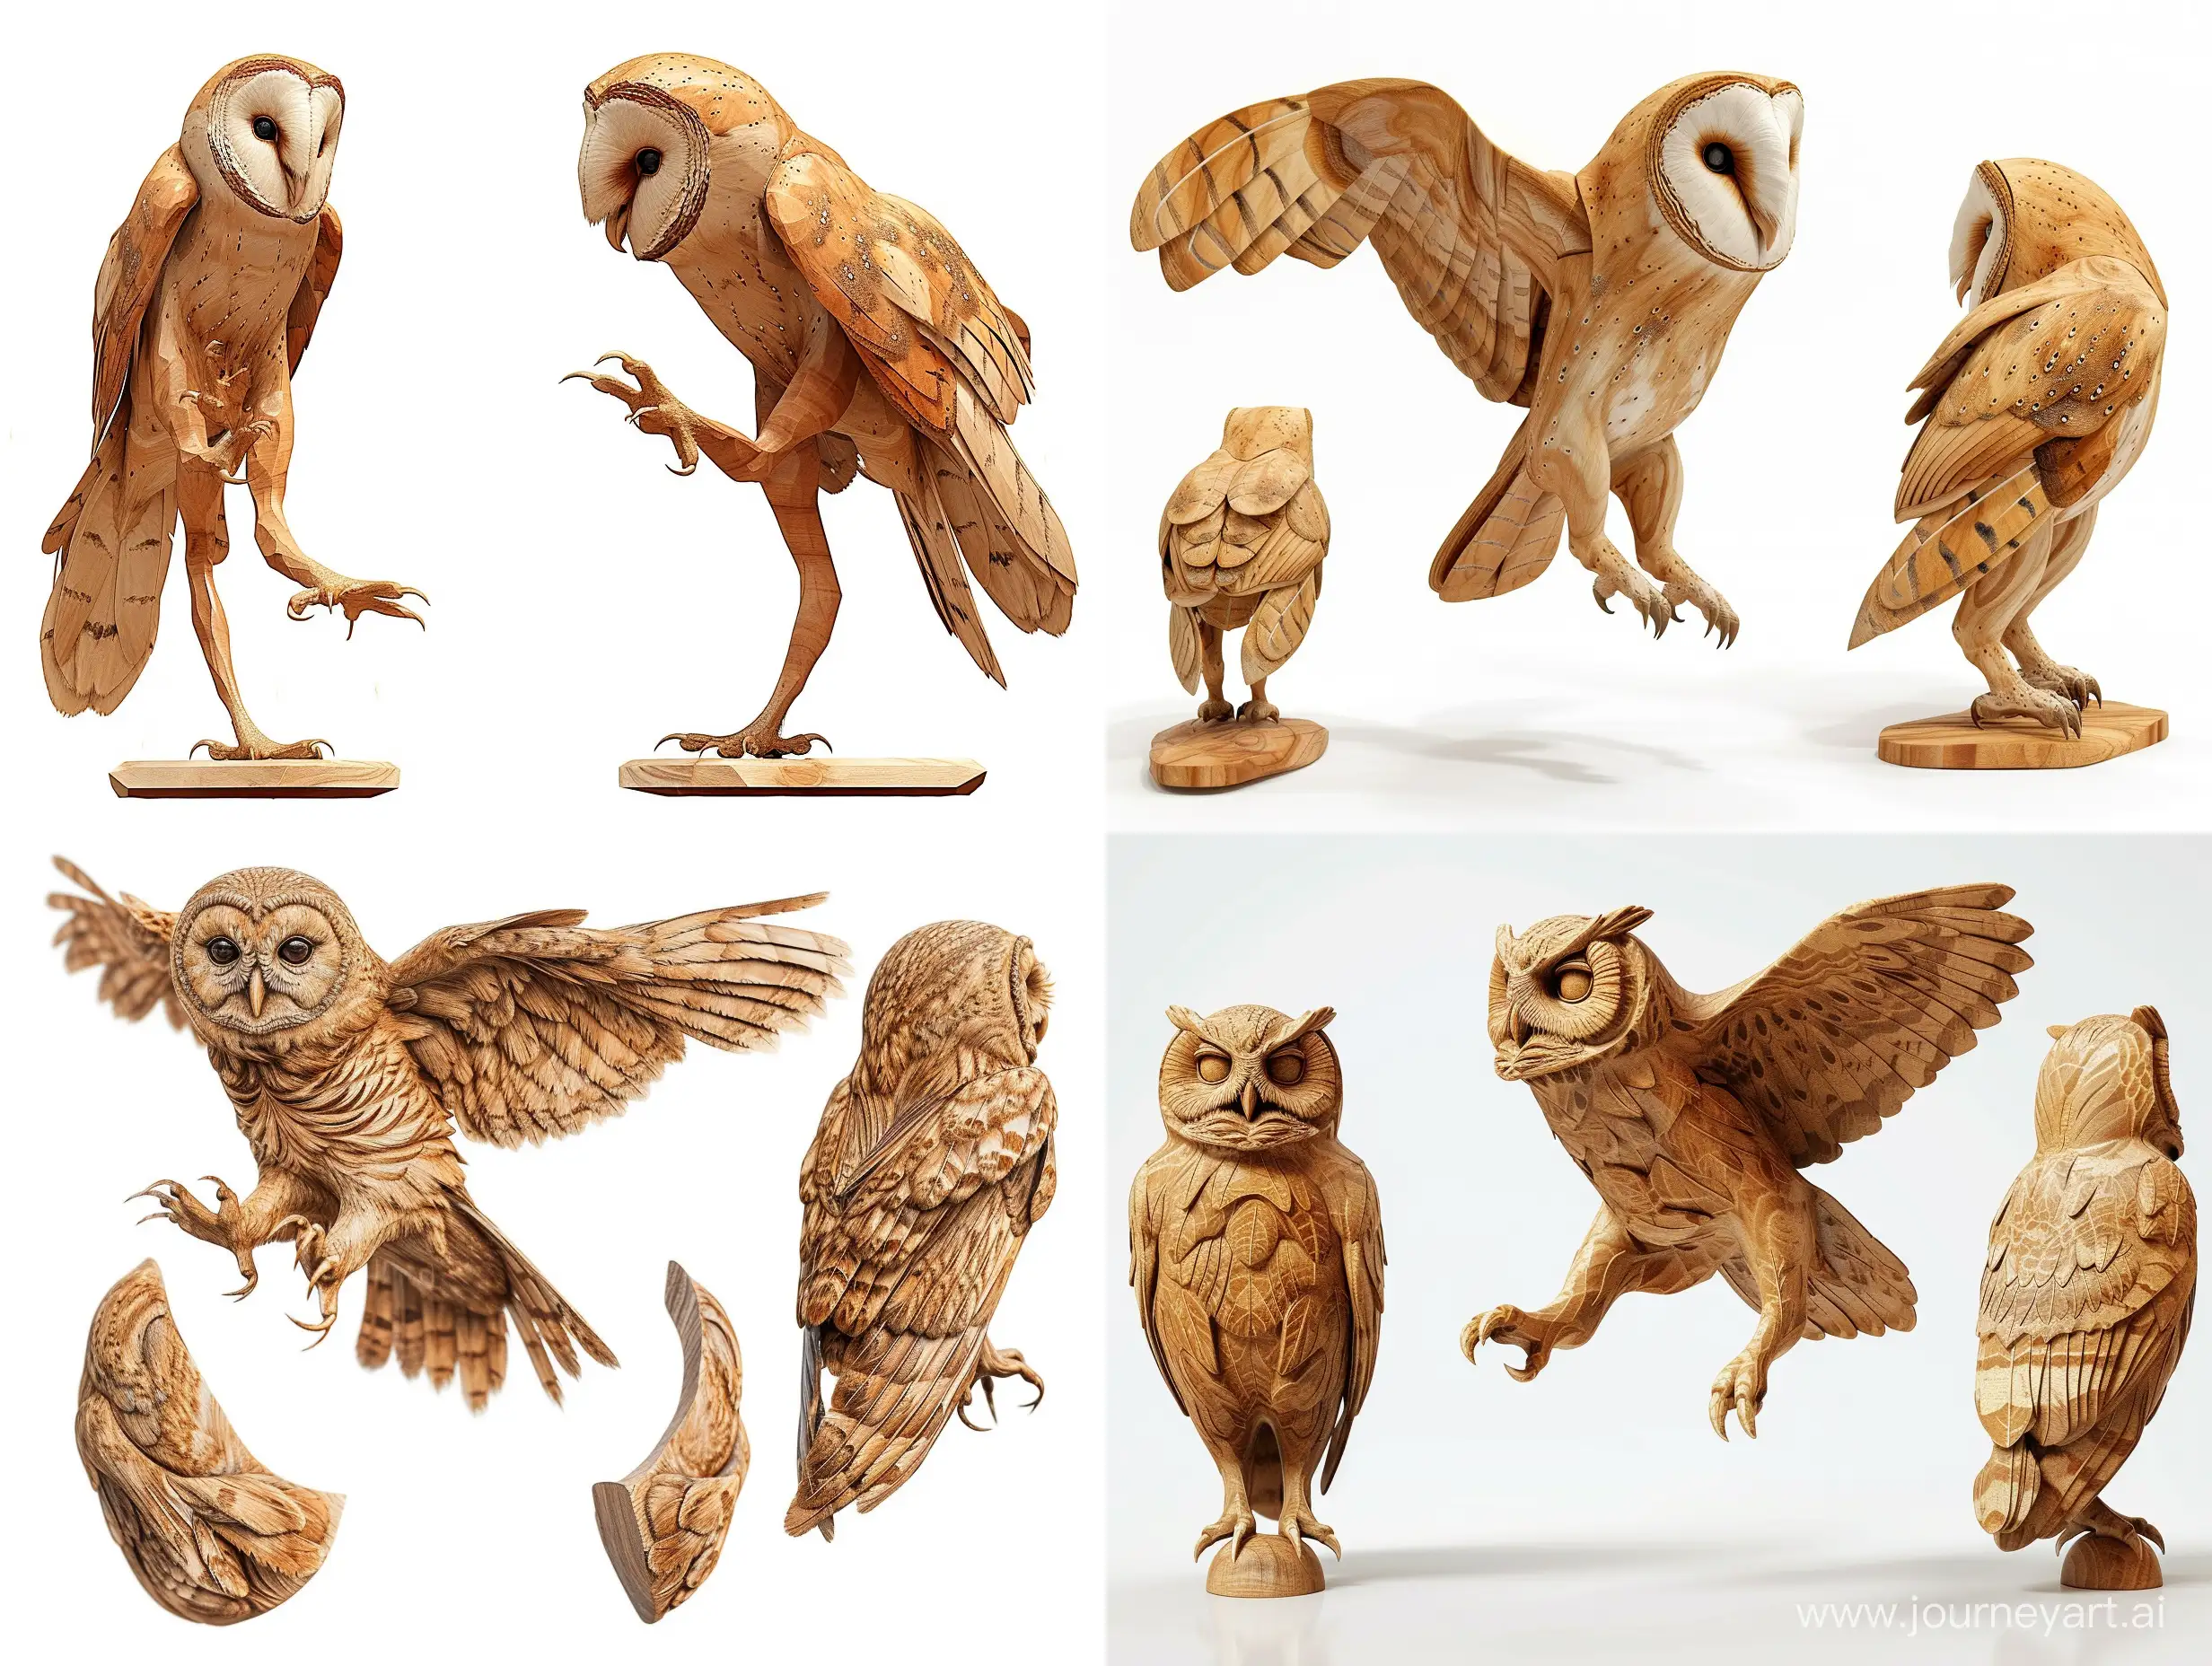 Realistic-Wooden-Owl-Sculpture-in-Dynamic-Poses-8k-Render